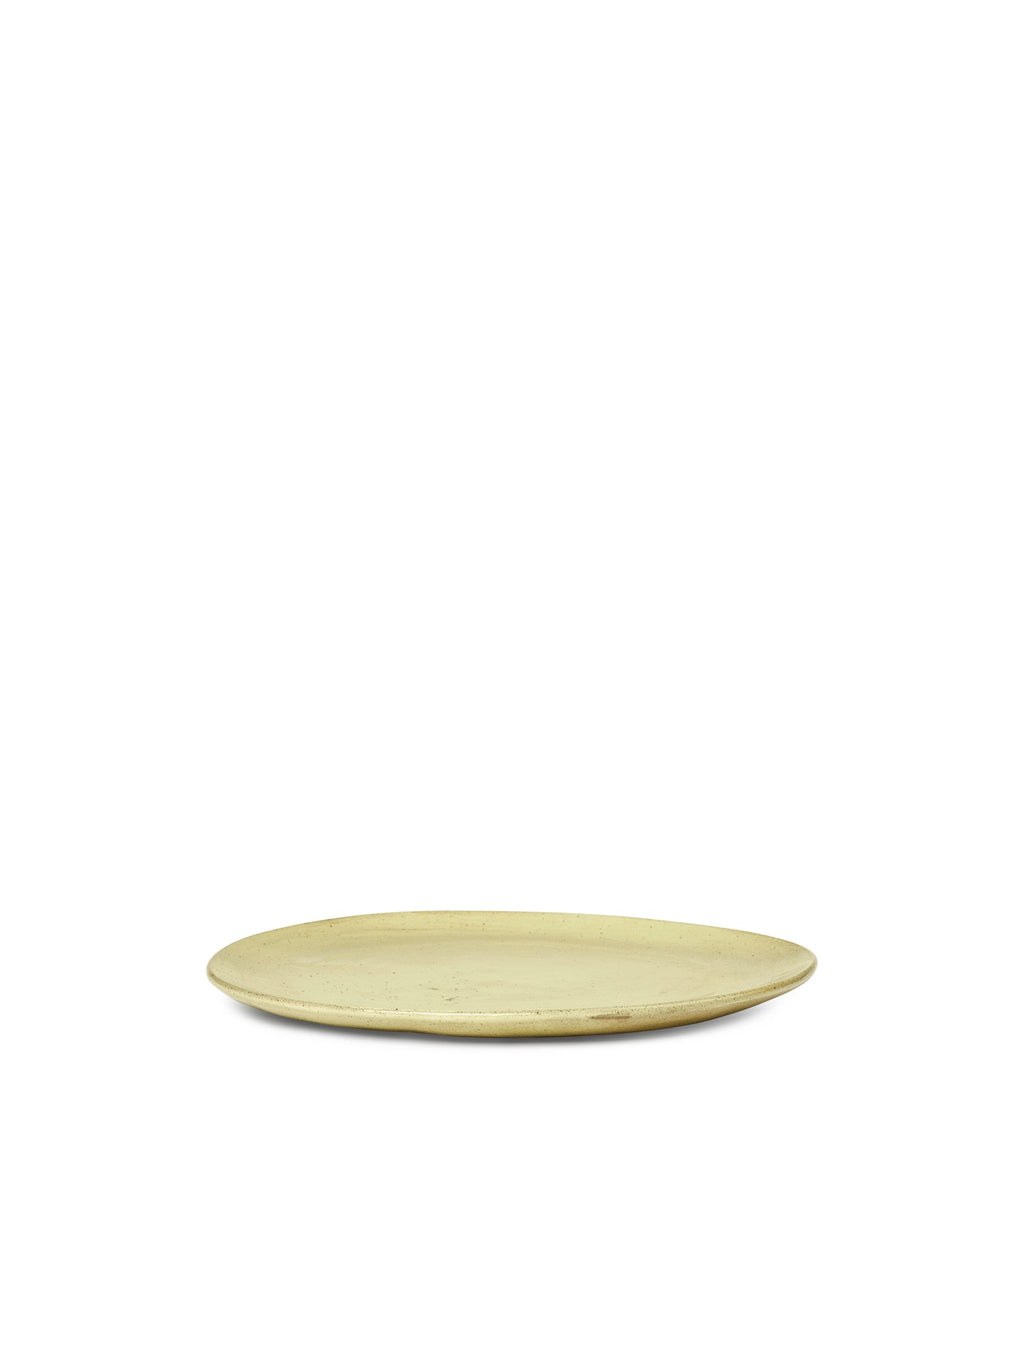 Flow Large Plate by Ferm Living